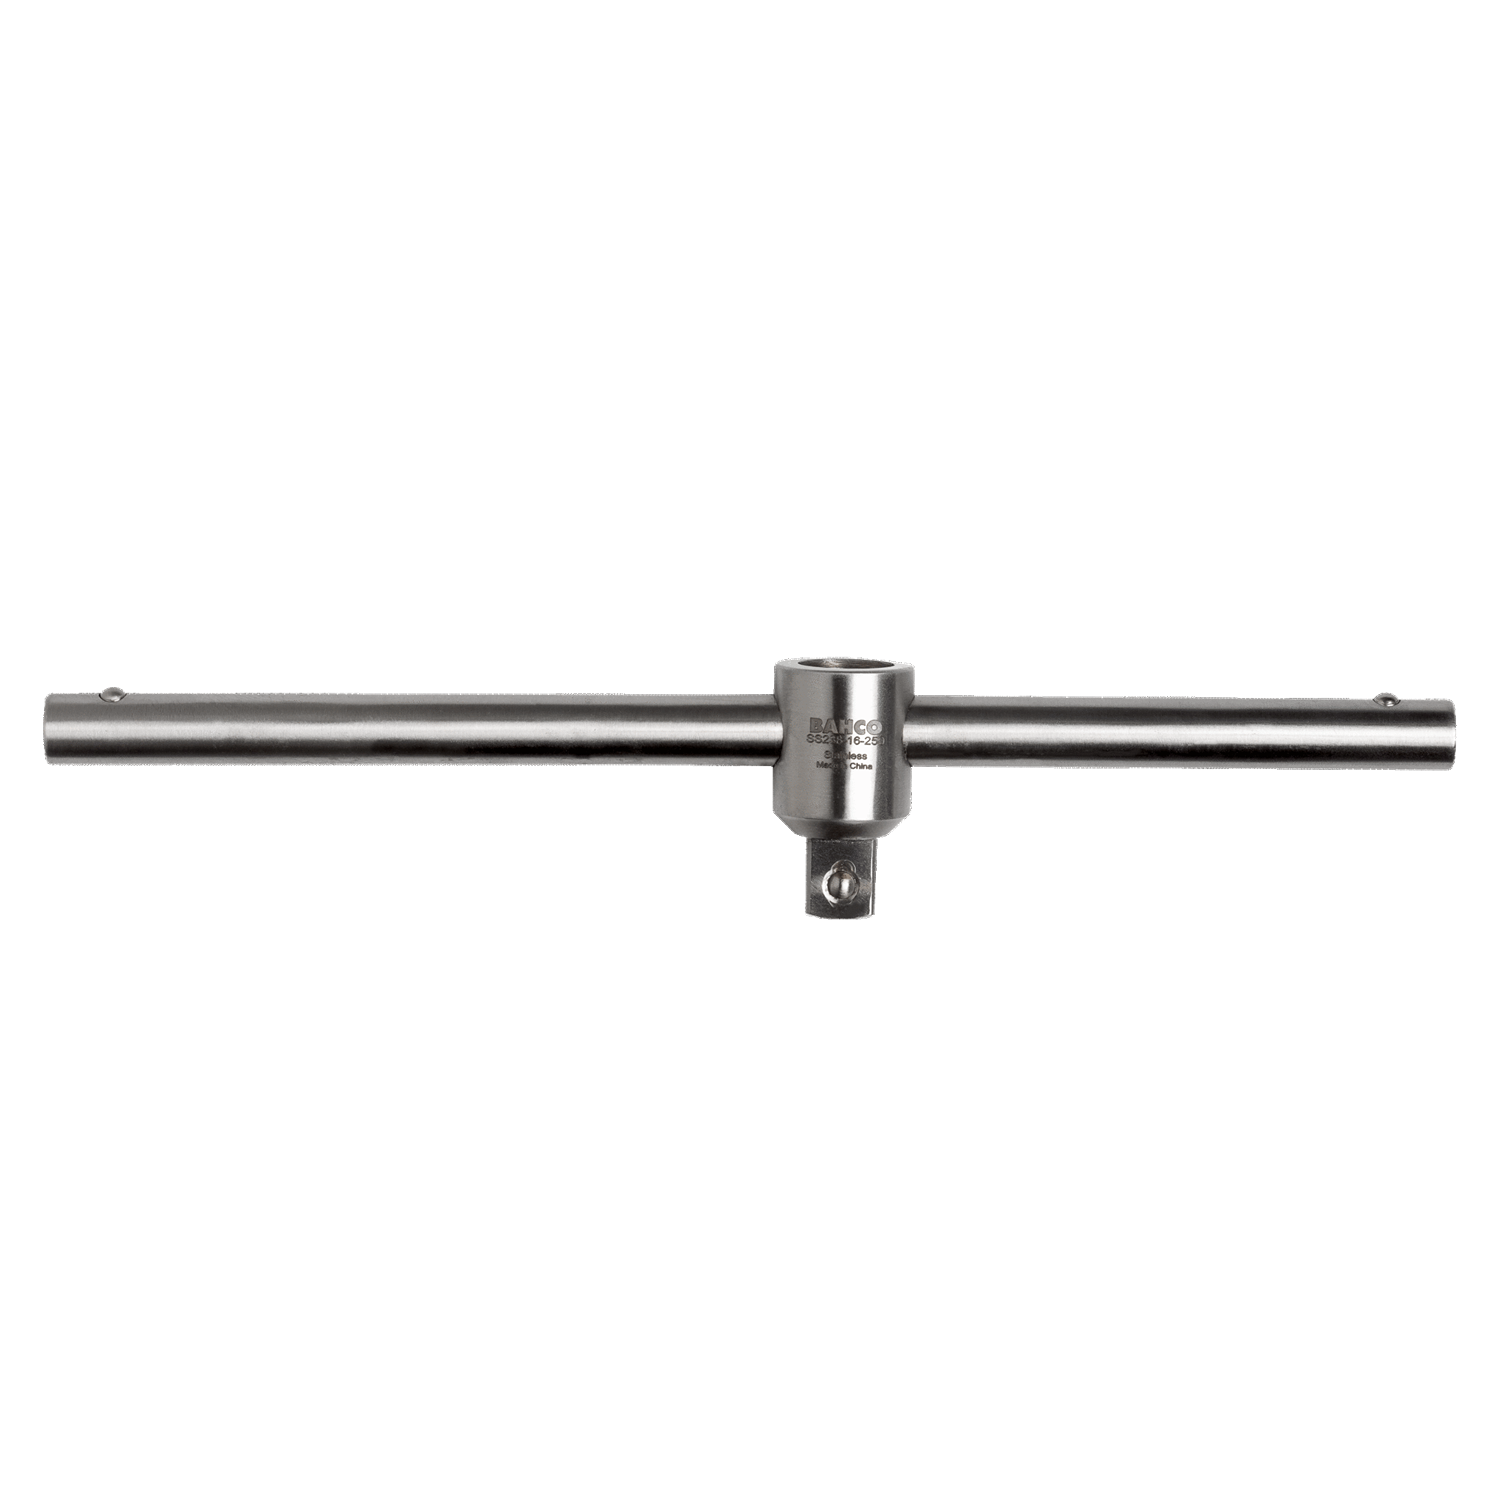 BAHCO SS238 Stainless Steel Sliding T-Handle (BAHCO Tools) - Premium Sliding T-Handle from BAHCO - Shop now at Yew Aik.